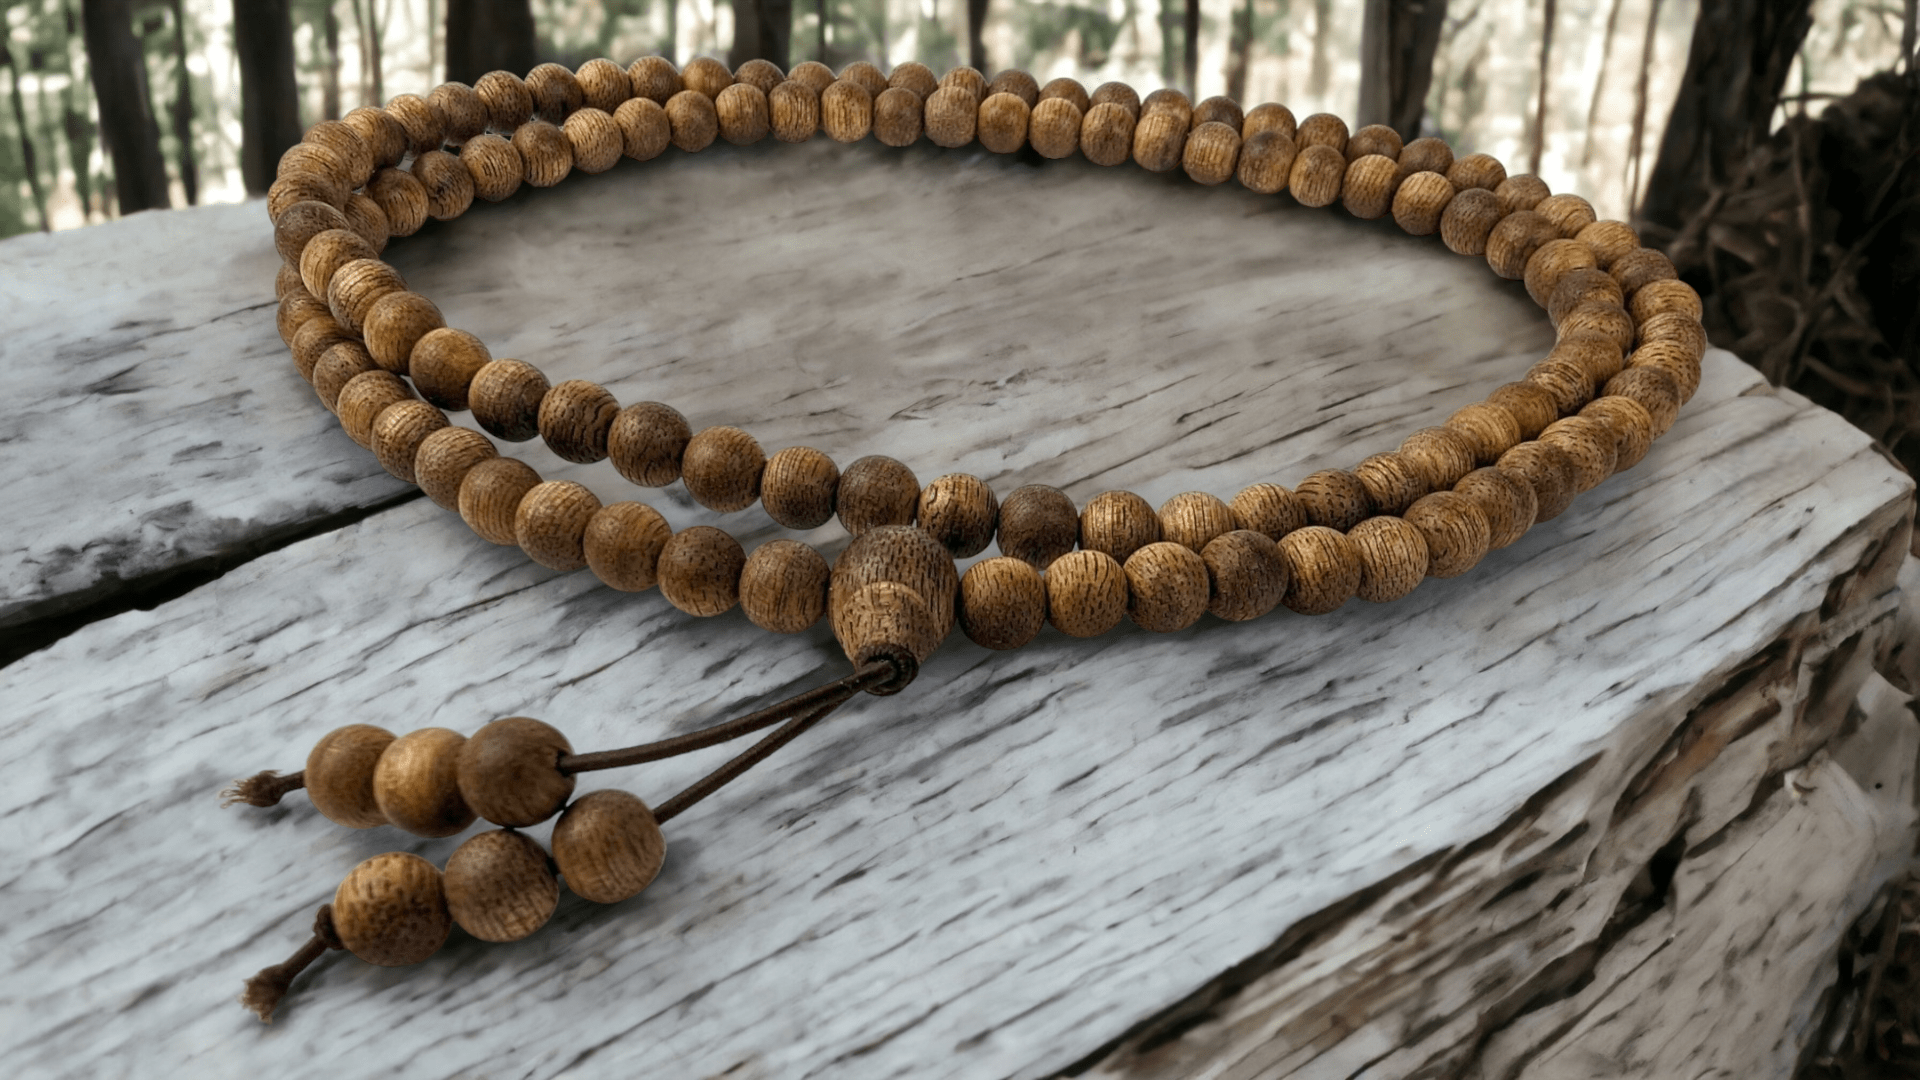 Cultivated Agarwood Beads